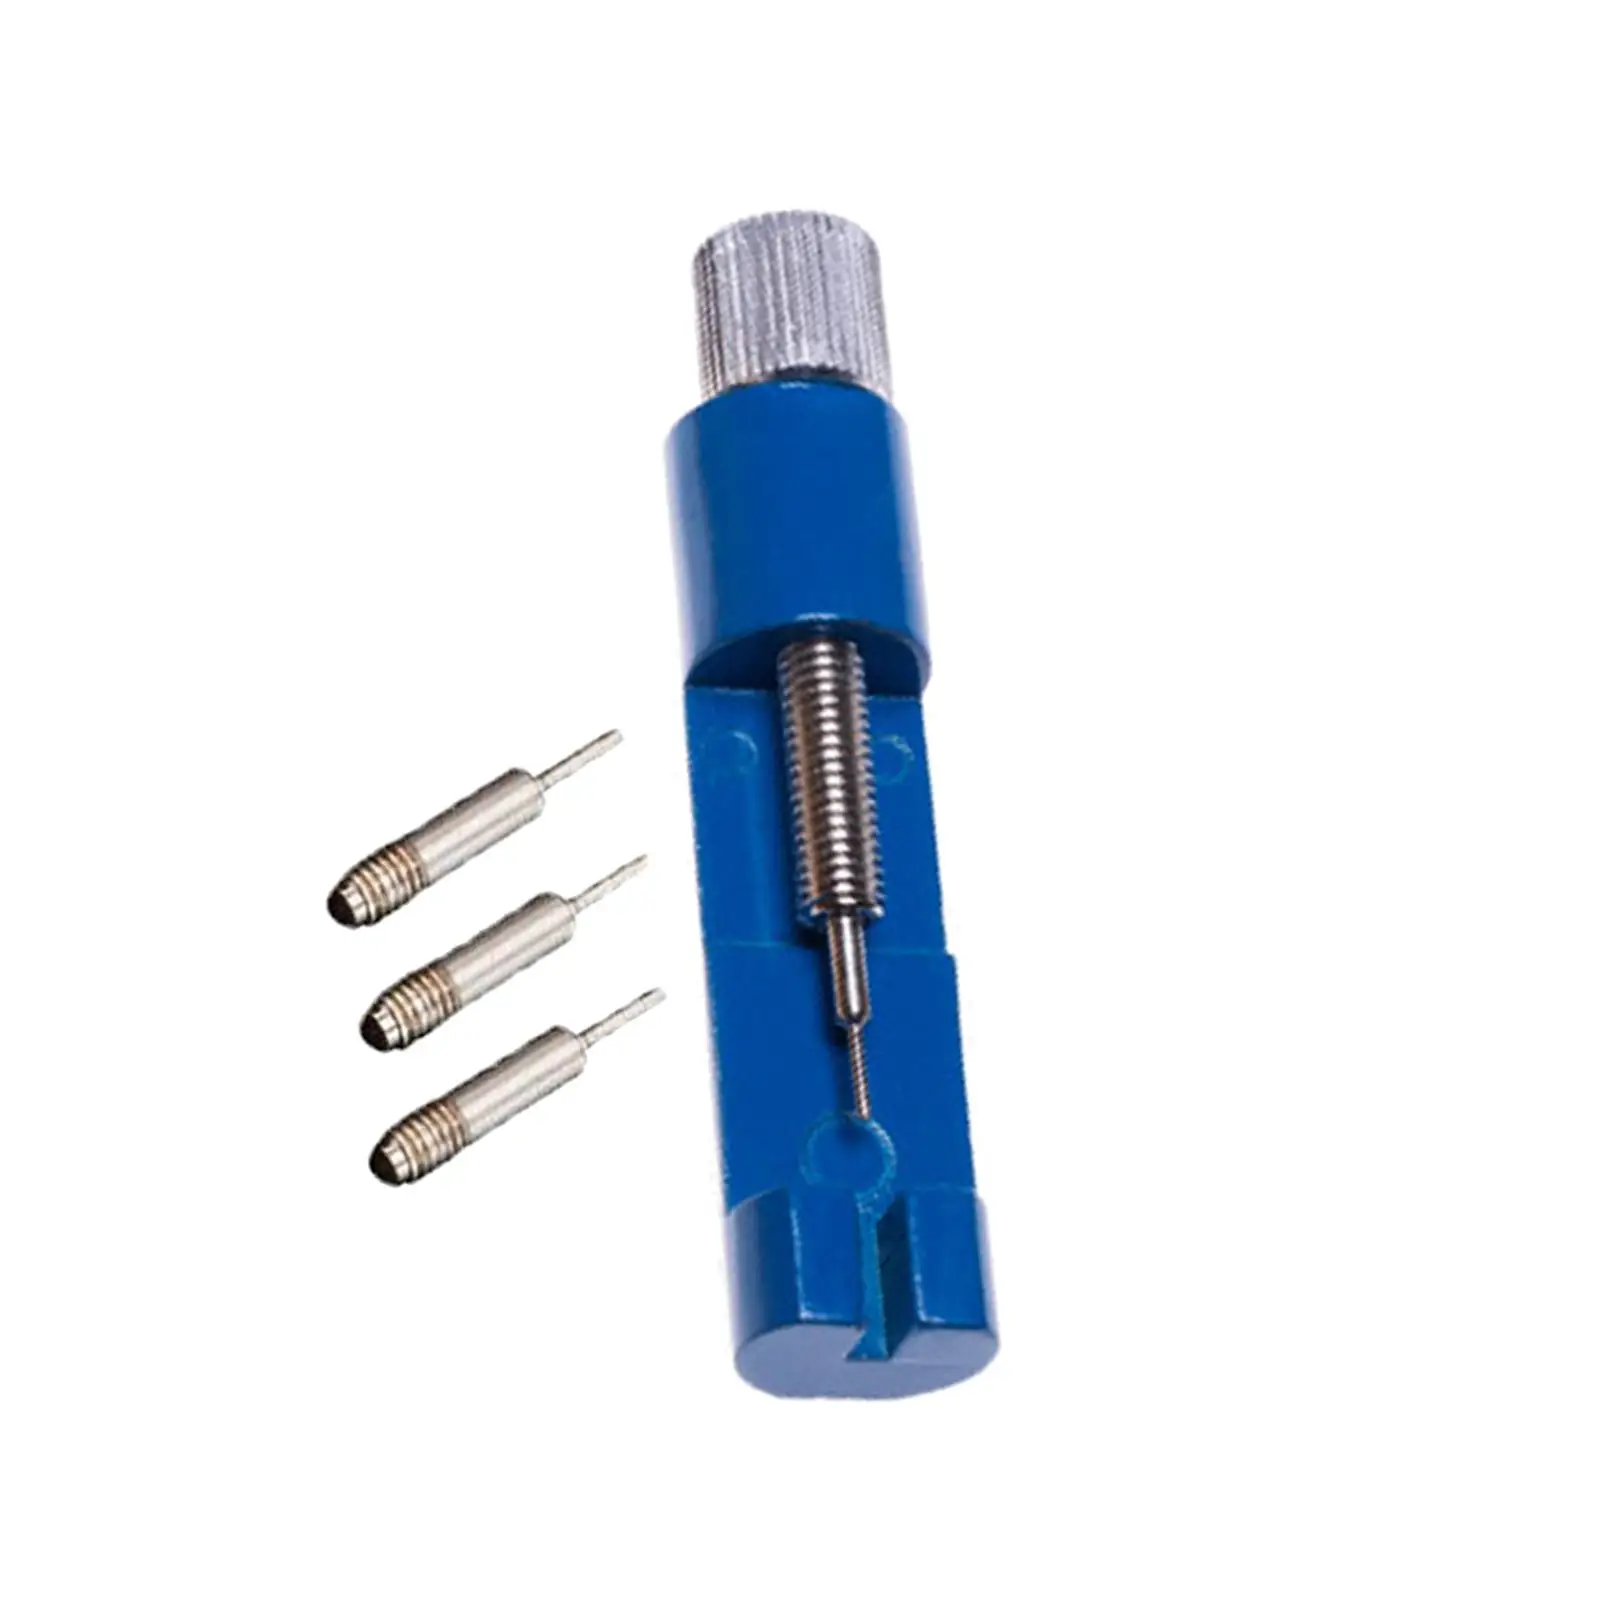 Watch Link Removal Tool Kit Watch Strap Adjustment Metal Punch pin 3 Pins Spring Bars Watch Strap Sizing Tool for Repair